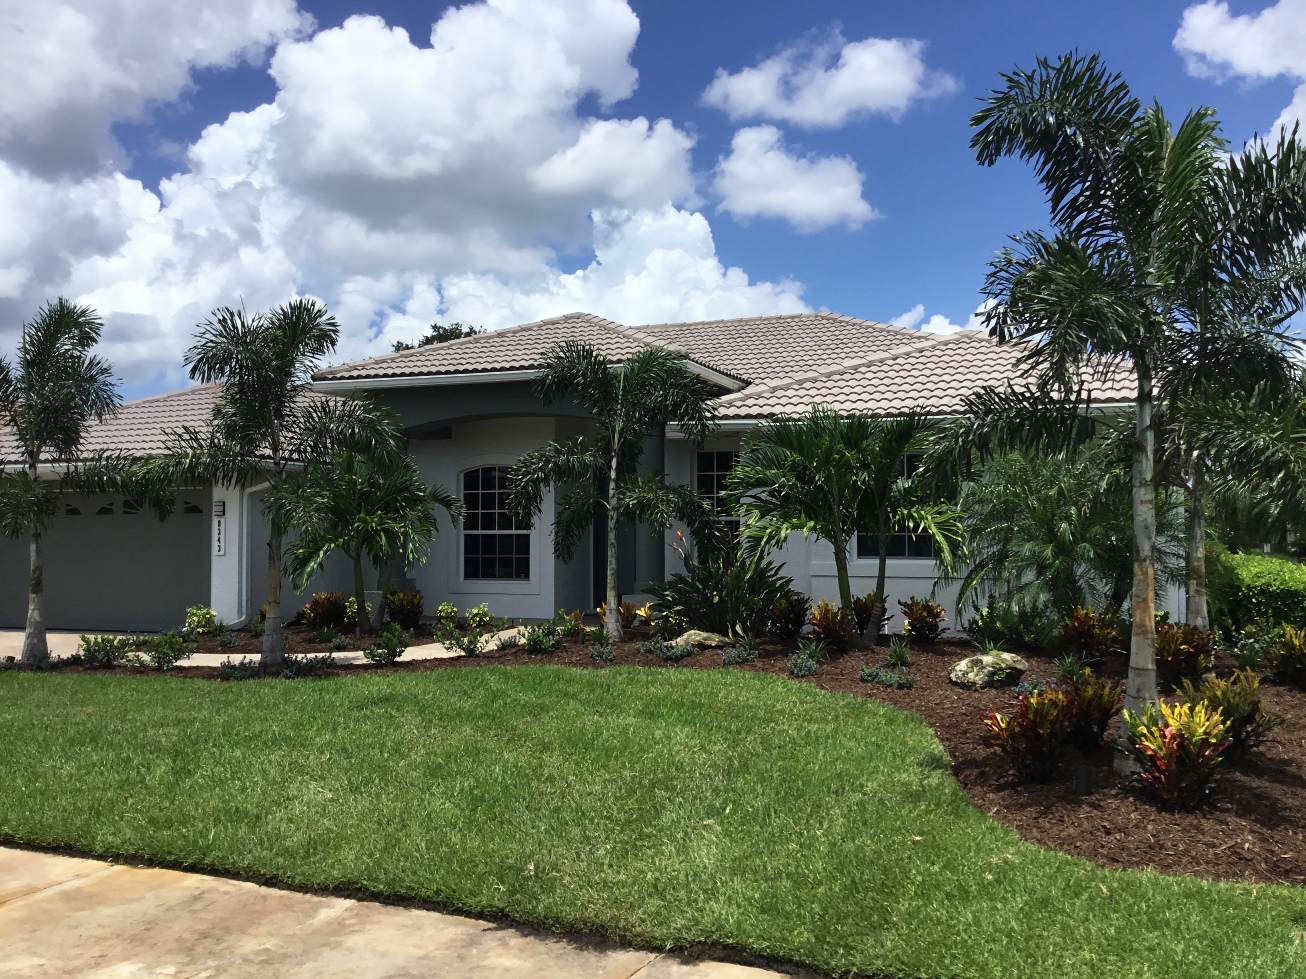 8 Tips on Improving Curb Appeal for Sarasota Homeowners